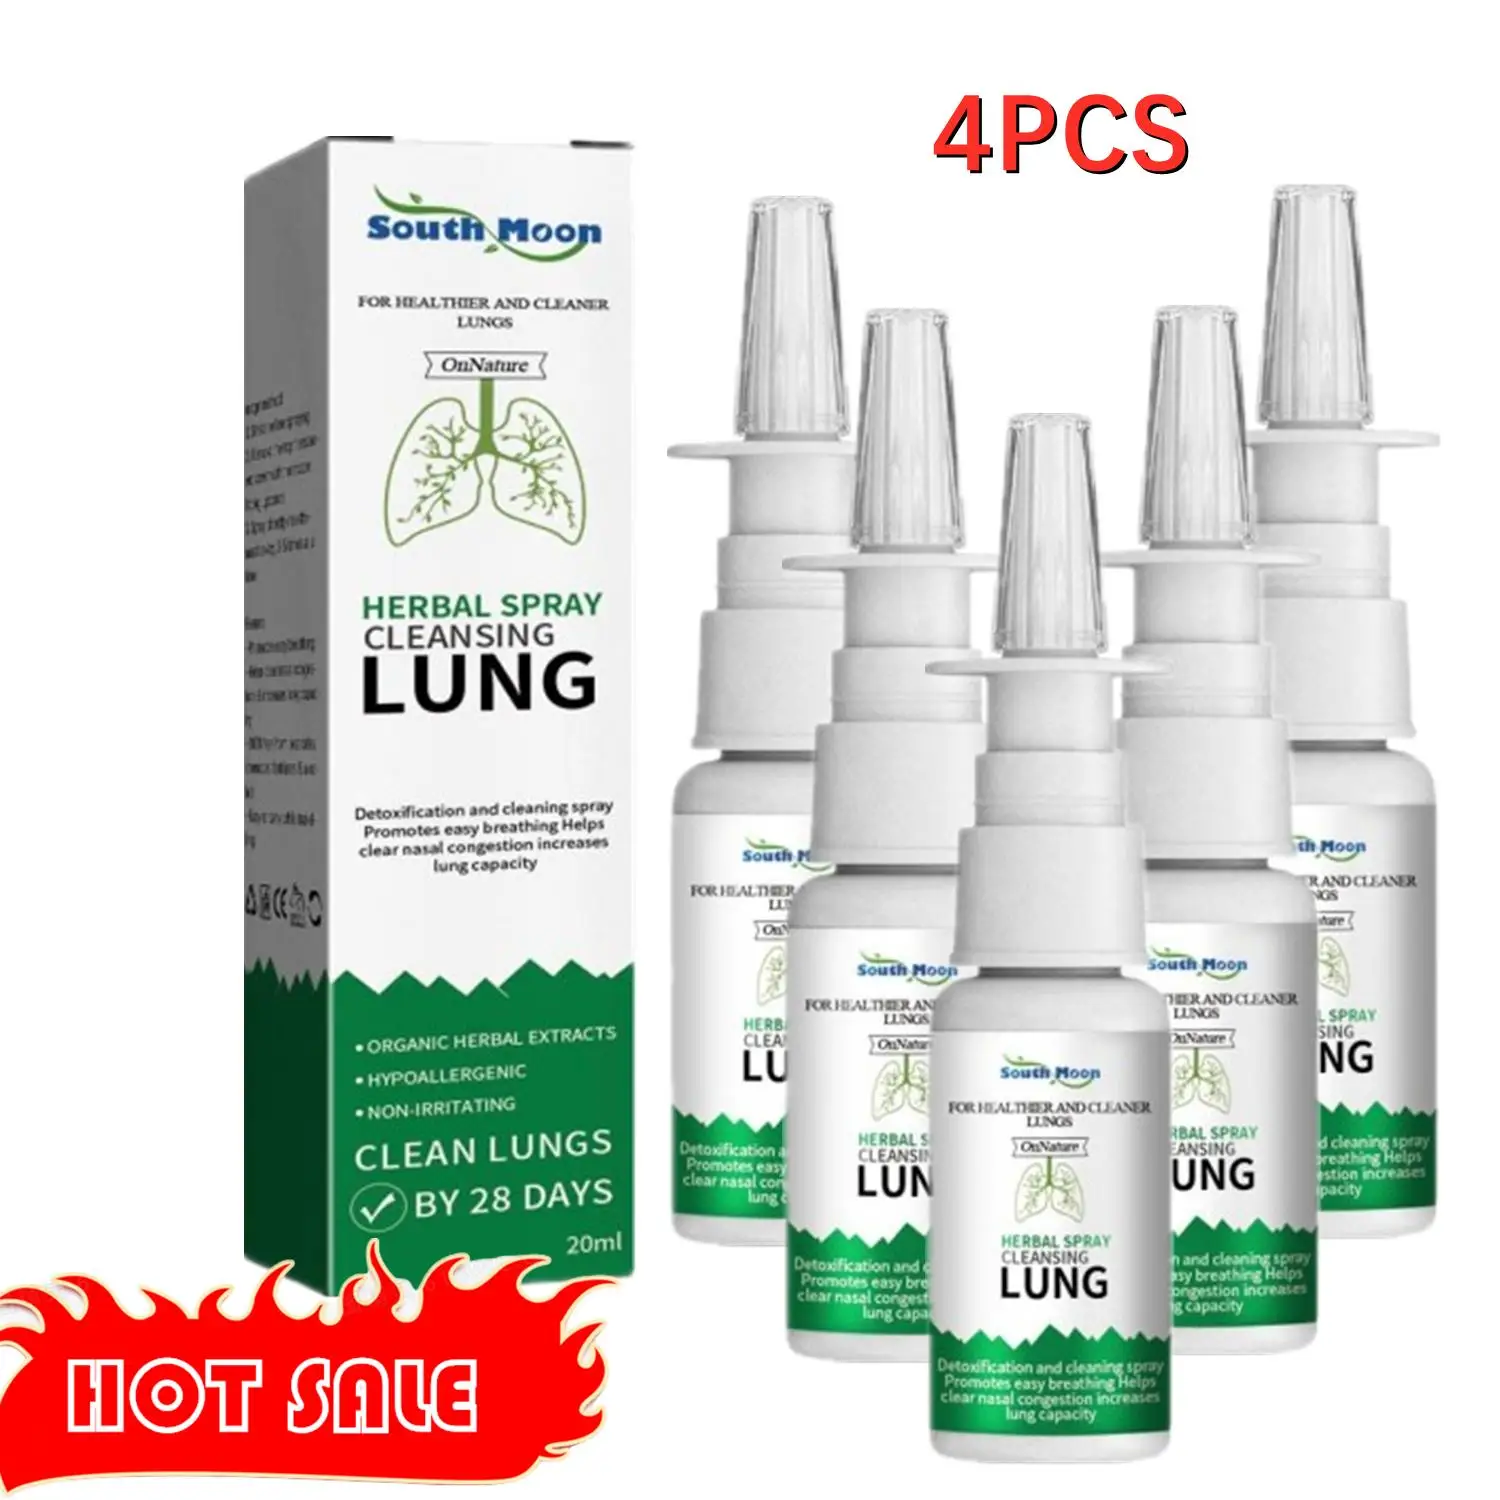 

4PCS Lung Detox Herbal Cleanser Spray For Smokers Clear Nasal Congestion Anti Snoring Solution Stop Snore Relief Spray Nose 20ml